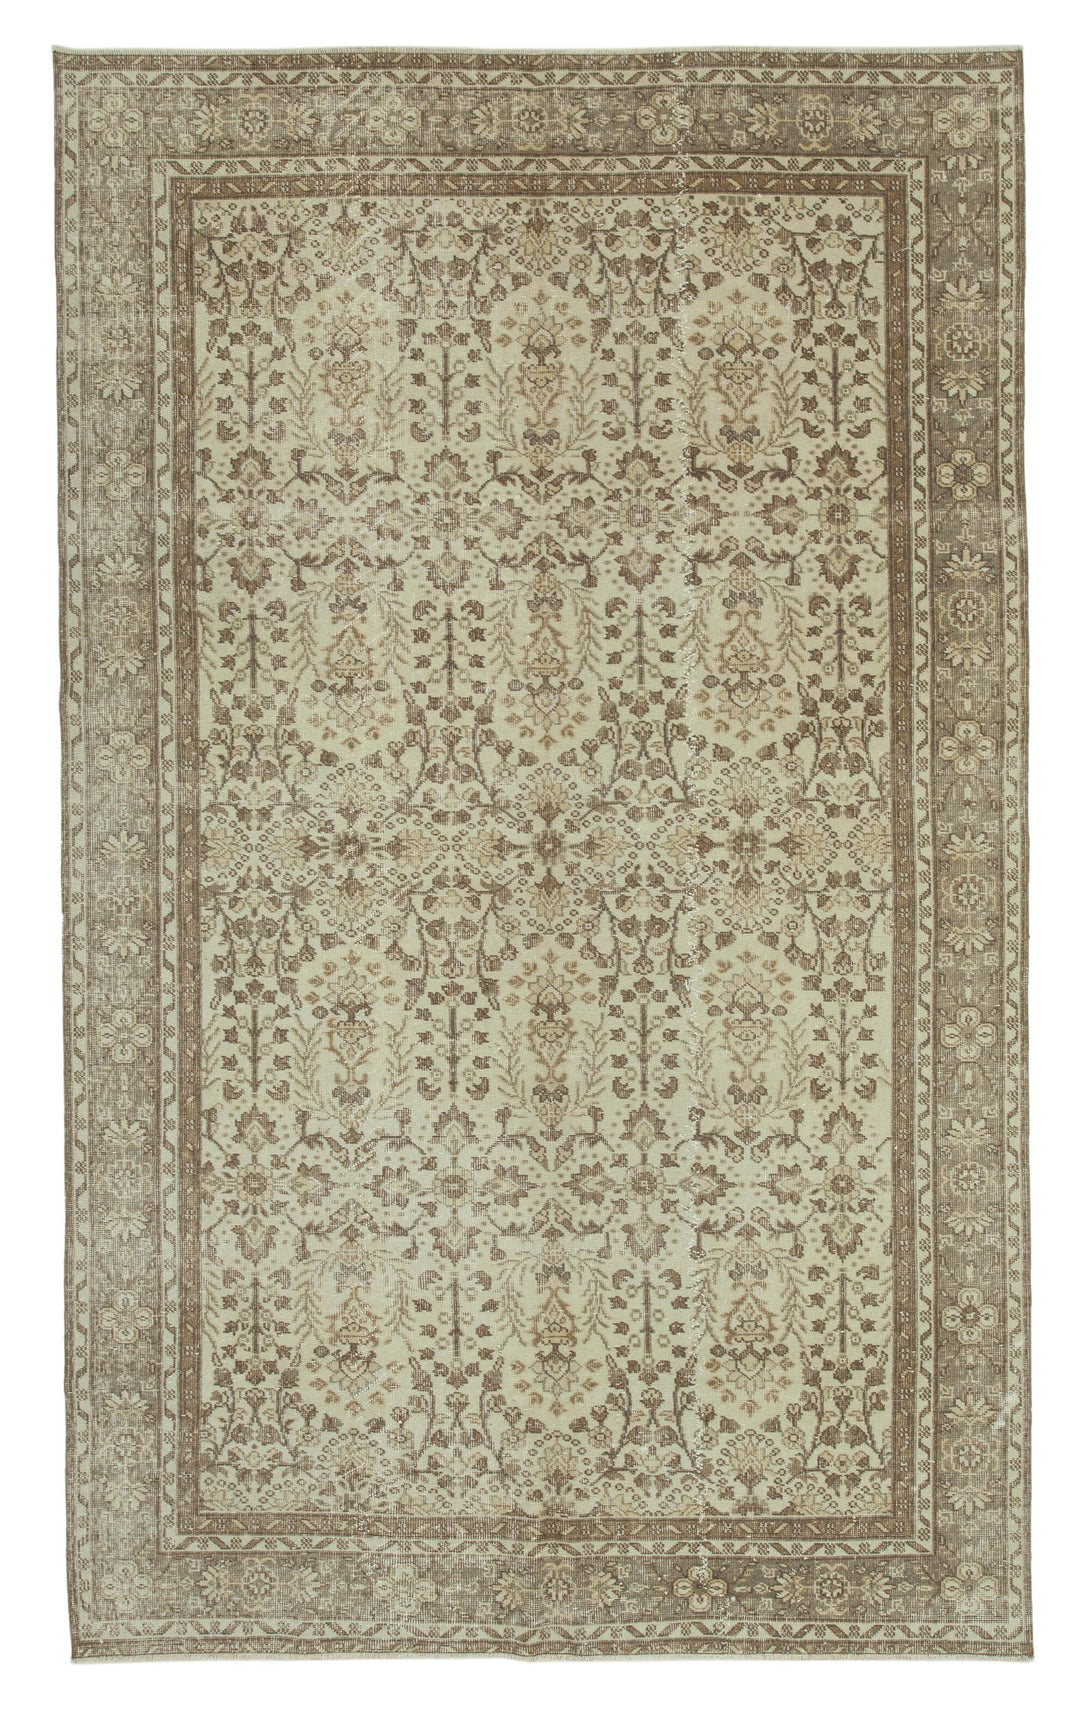 Handmade White Wash Area Rug > Design# OL-AC-36550 > Size: 6'-2" x 10'-2", Carpet Culture Rugs, Handmade Rugs, NYC Rugs, New Rugs, Shop Rugs, Rug Store, Outlet Rugs, SoHo Rugs, Rugs in USA